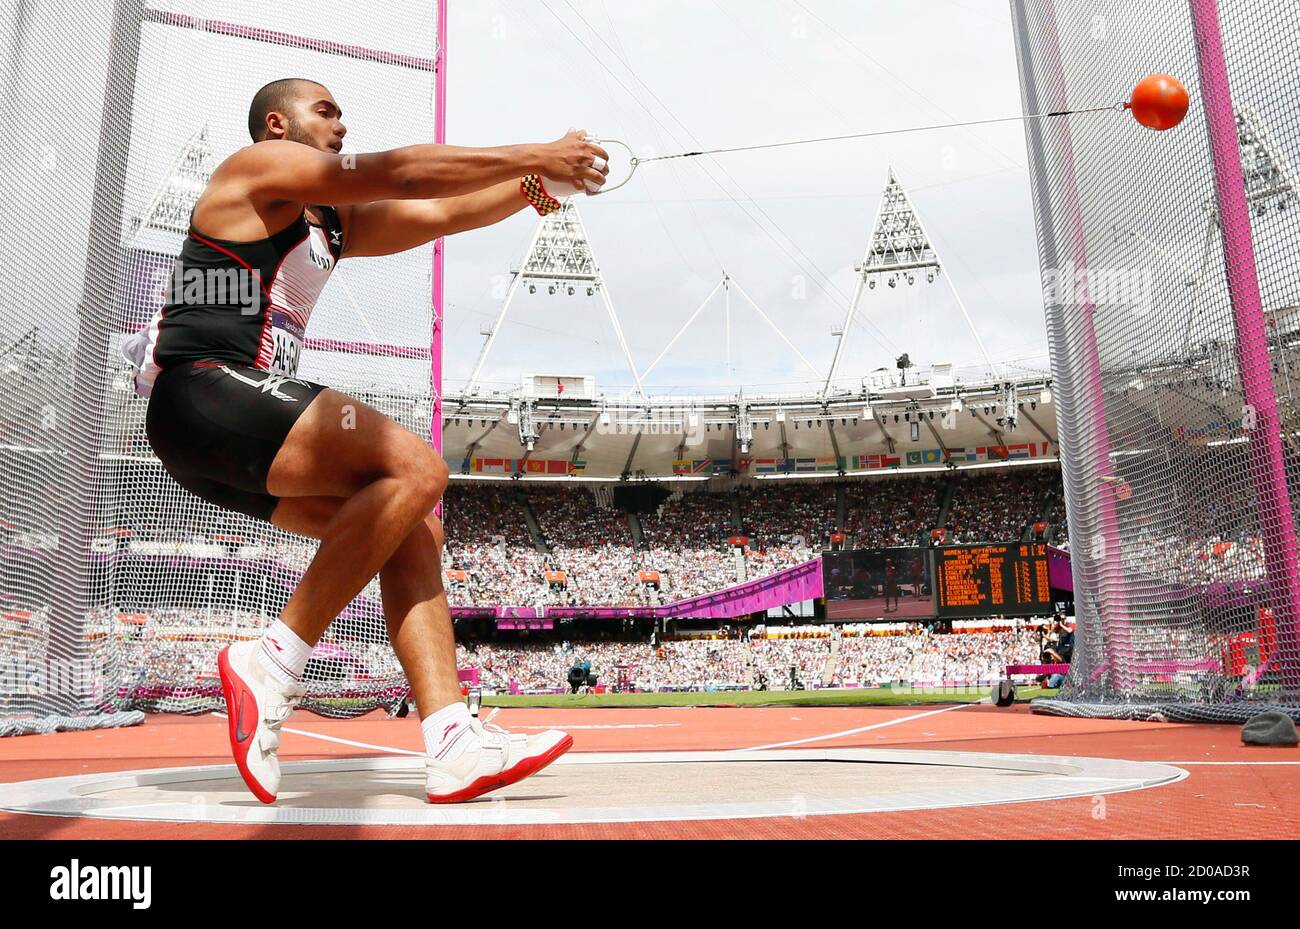 Egypt's Mostafa Al-Gamel competes during Group A of the men's hammer throw  qualifications in the London 2012 Olympic Games at the Olympic Stadium  August 3, 2012. REUTERS/Kai Pfaffenbach (BRITAIN - Tags: OLYMPICS